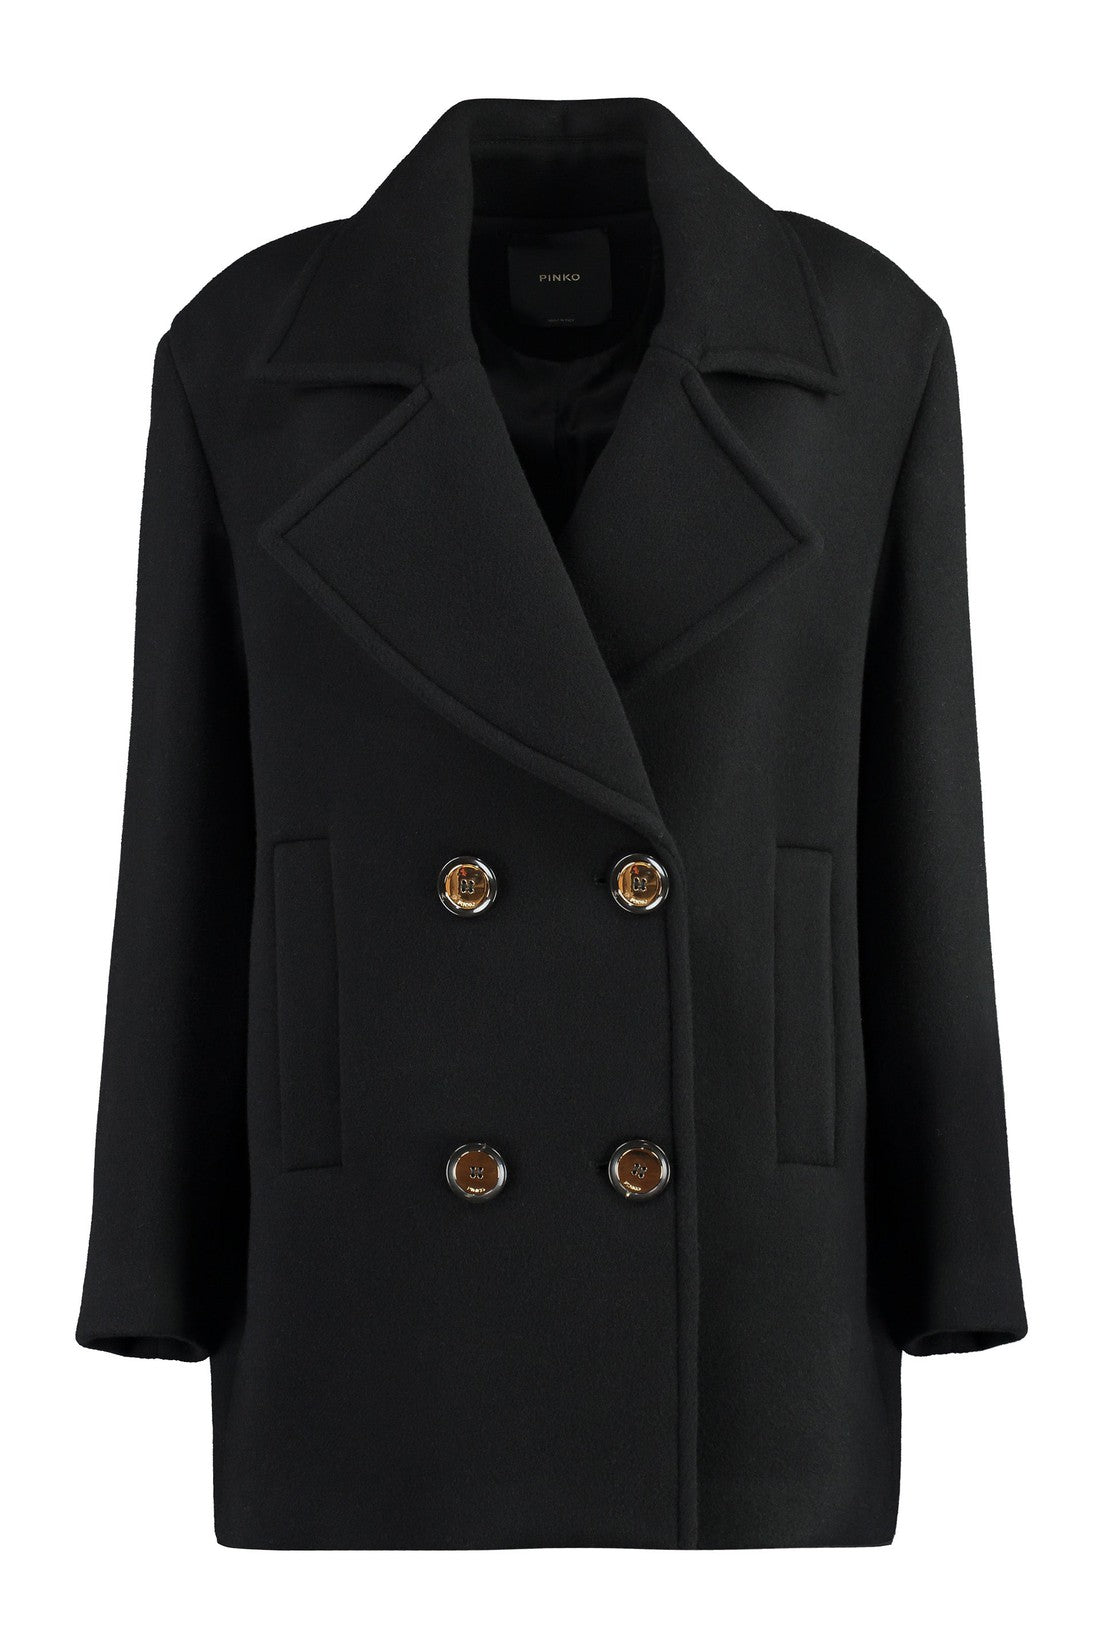 Pinko-OUTLET-SALE-Double-breasted wool coat-ARCHIVIST